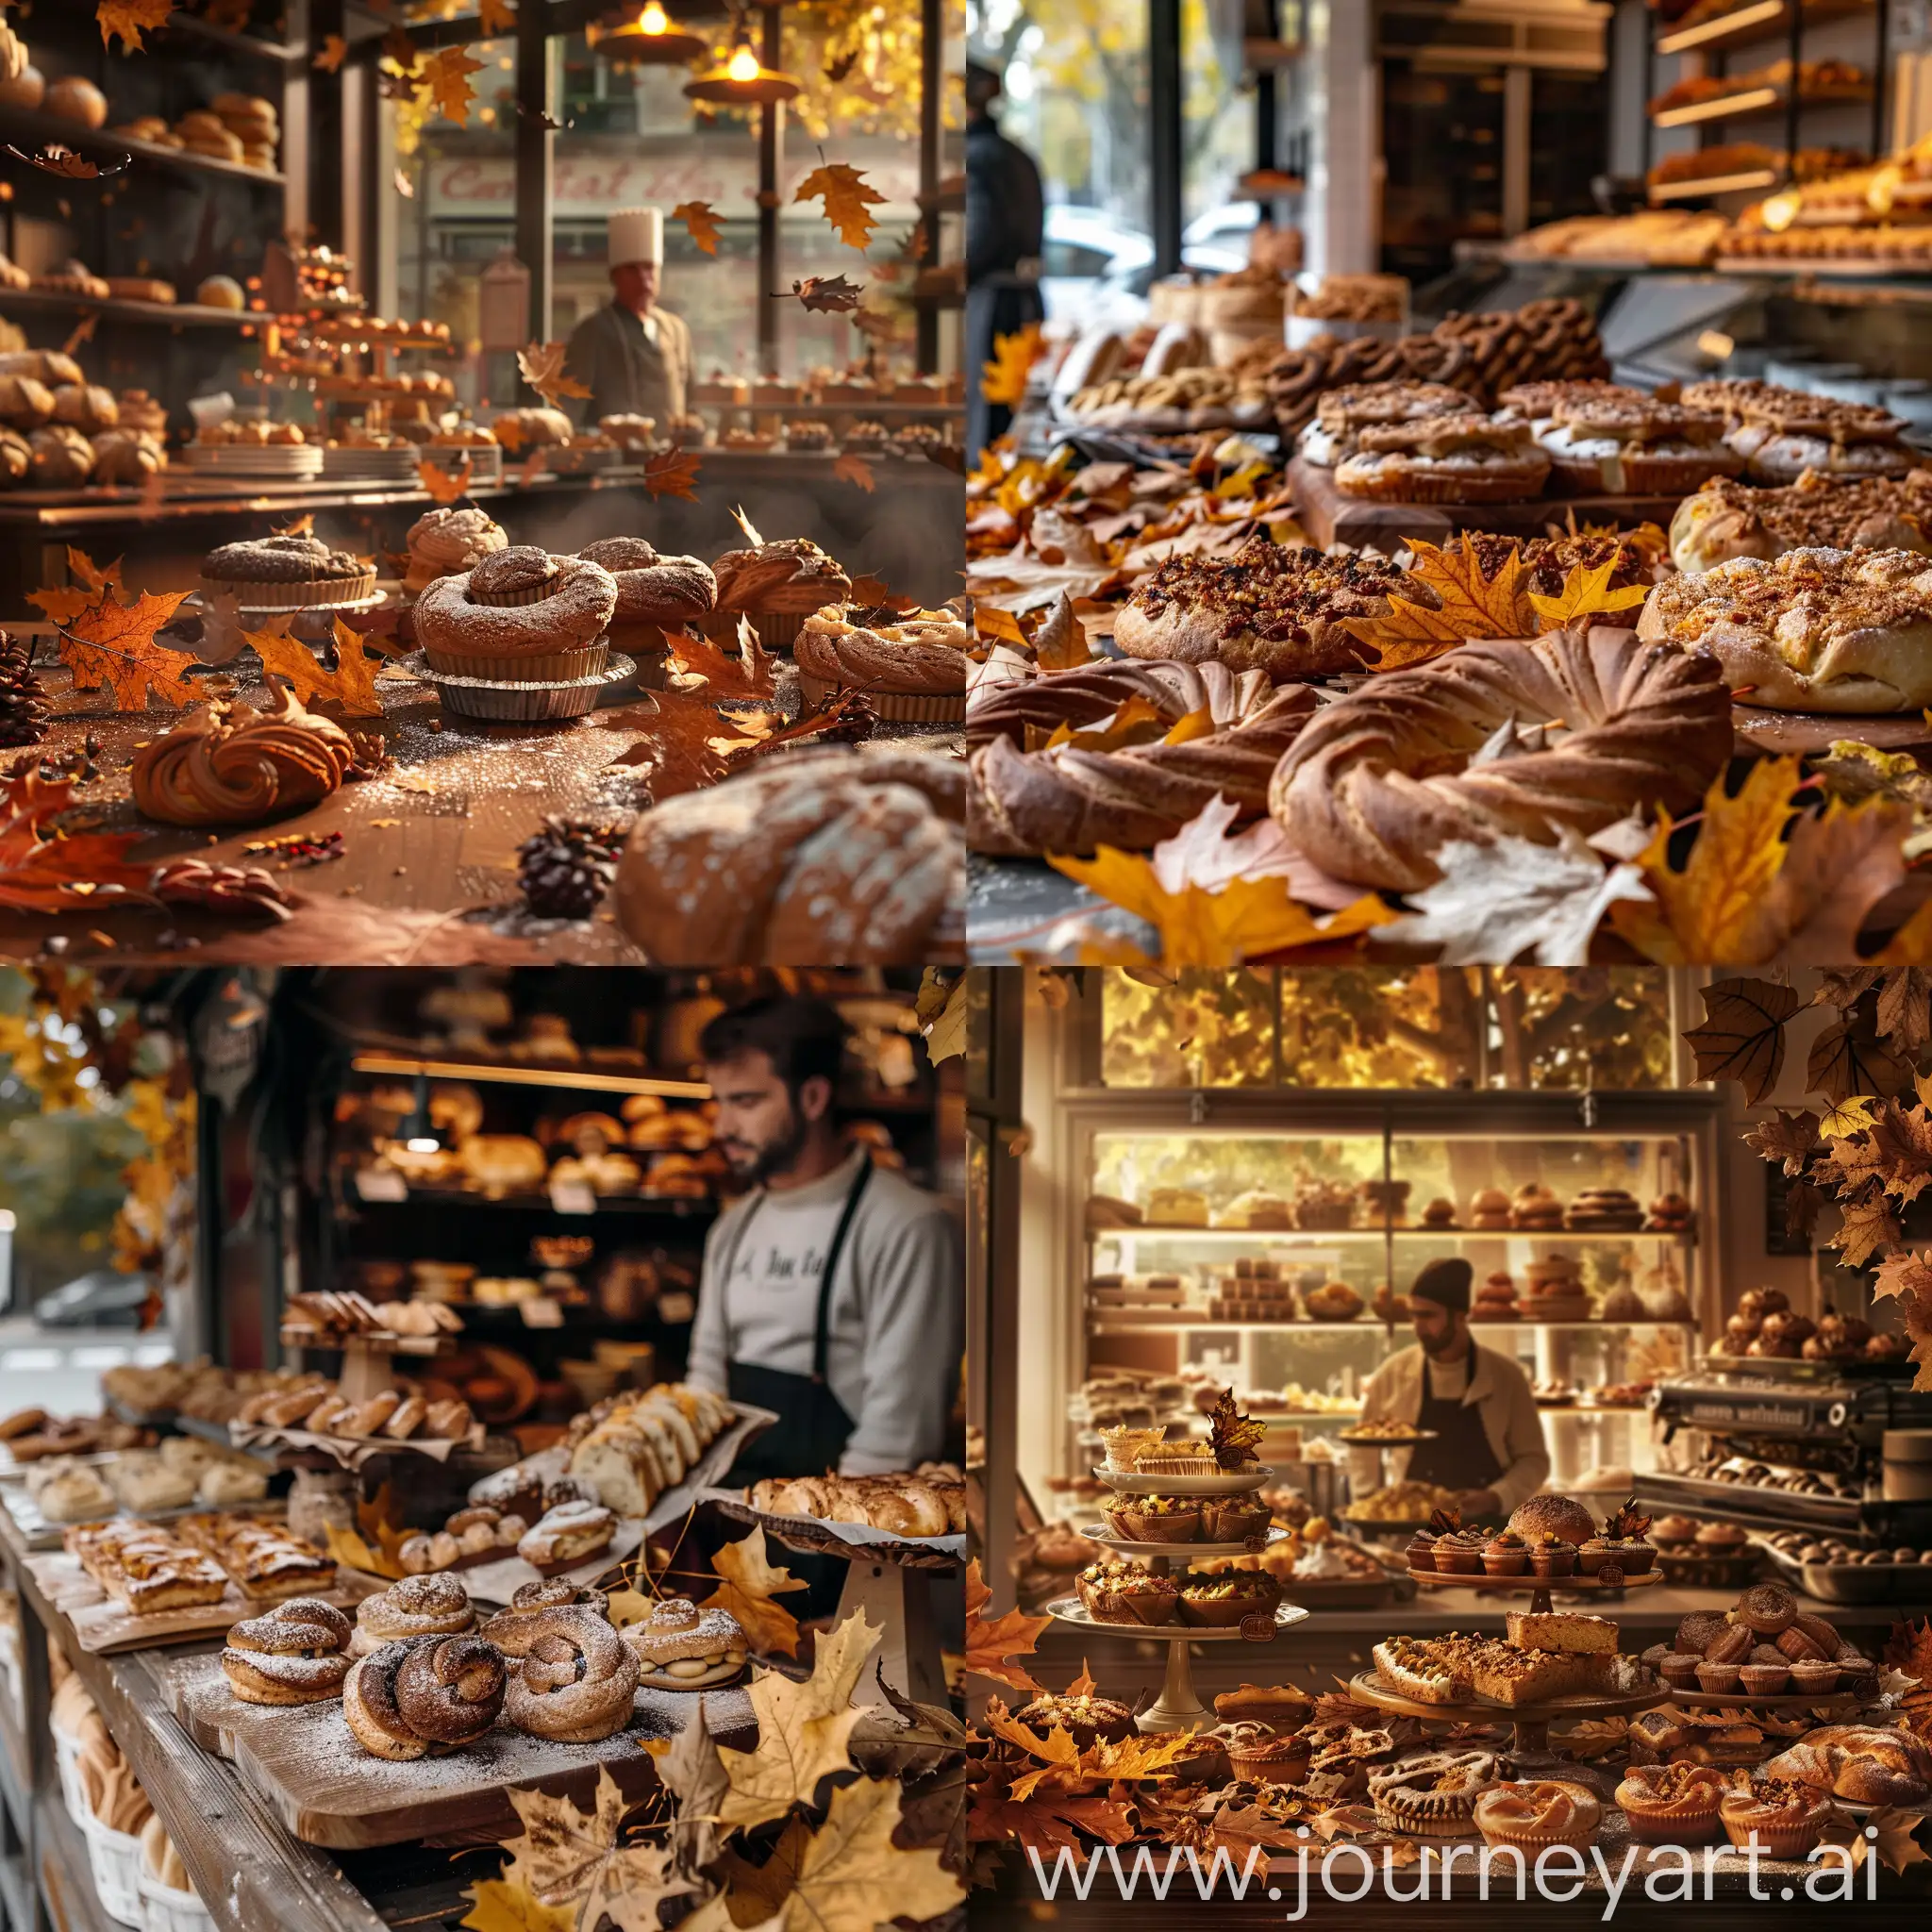 Baker-Surrounded-by-Autumn-Baked-Goods-and-Fallen-Leaves